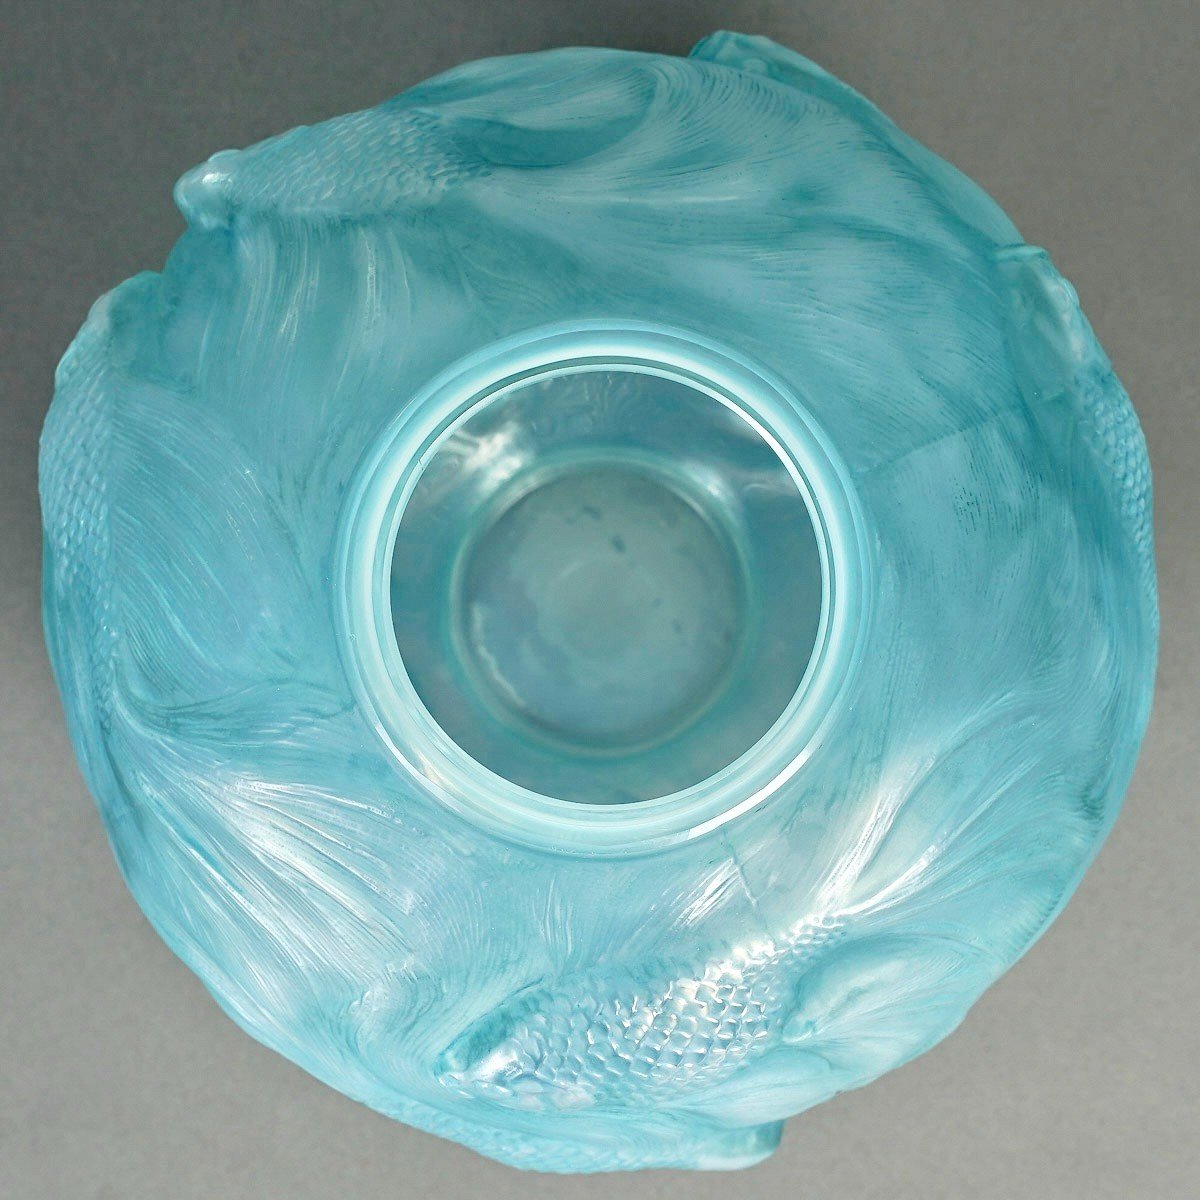 1924 René Lalique - Vase Formose Cased Opalescent Glass With Turquoise Blue Patina-photo-1